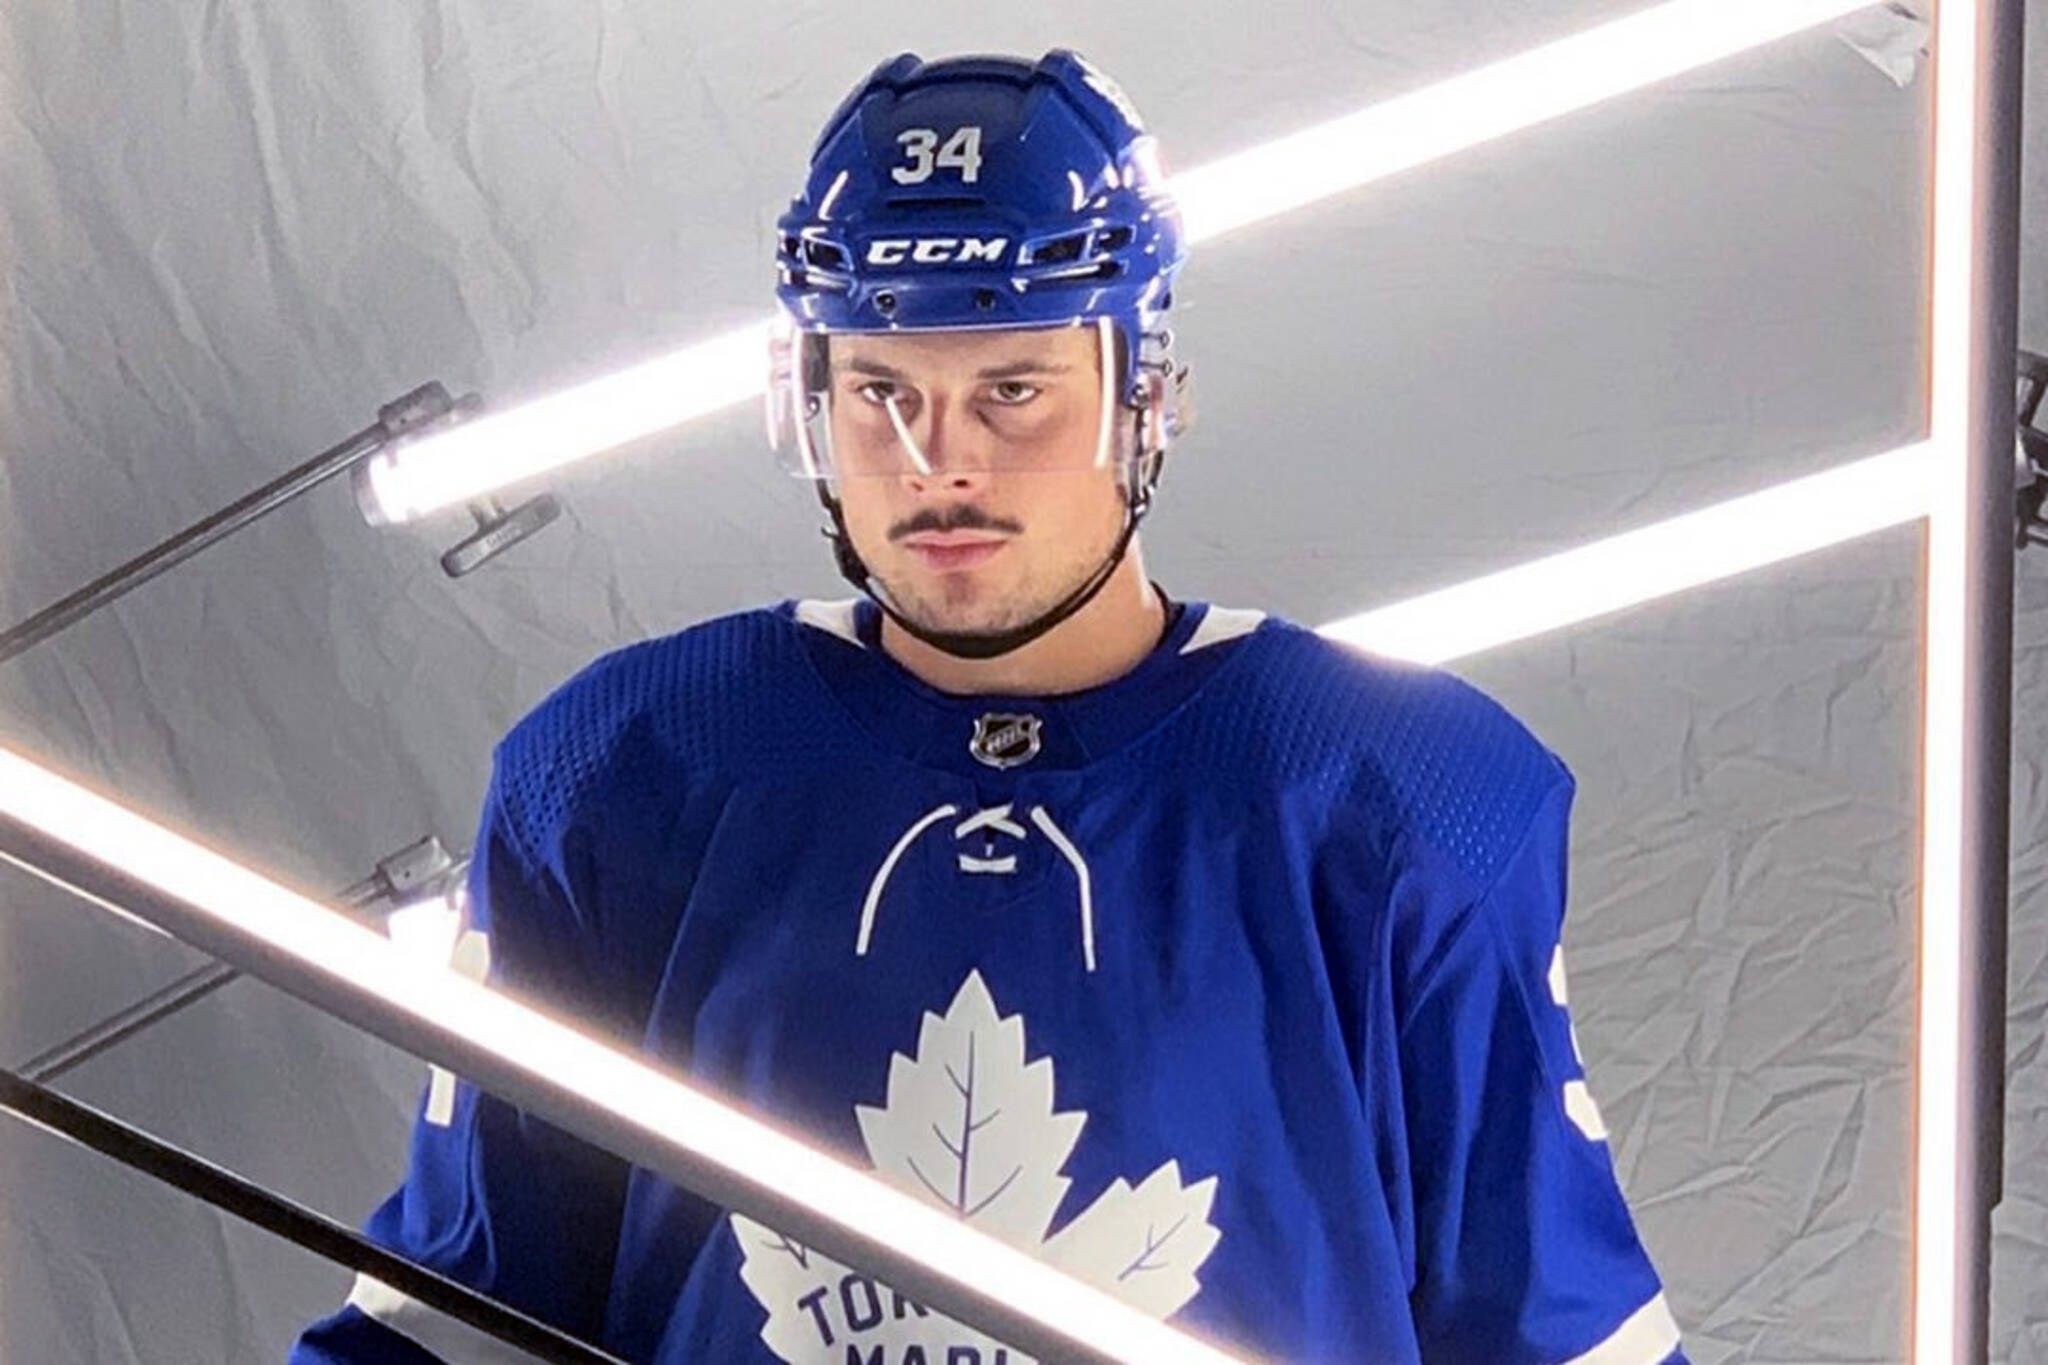 NHL star Auston Matthews faces disorderly conduct charge in Scottsdale